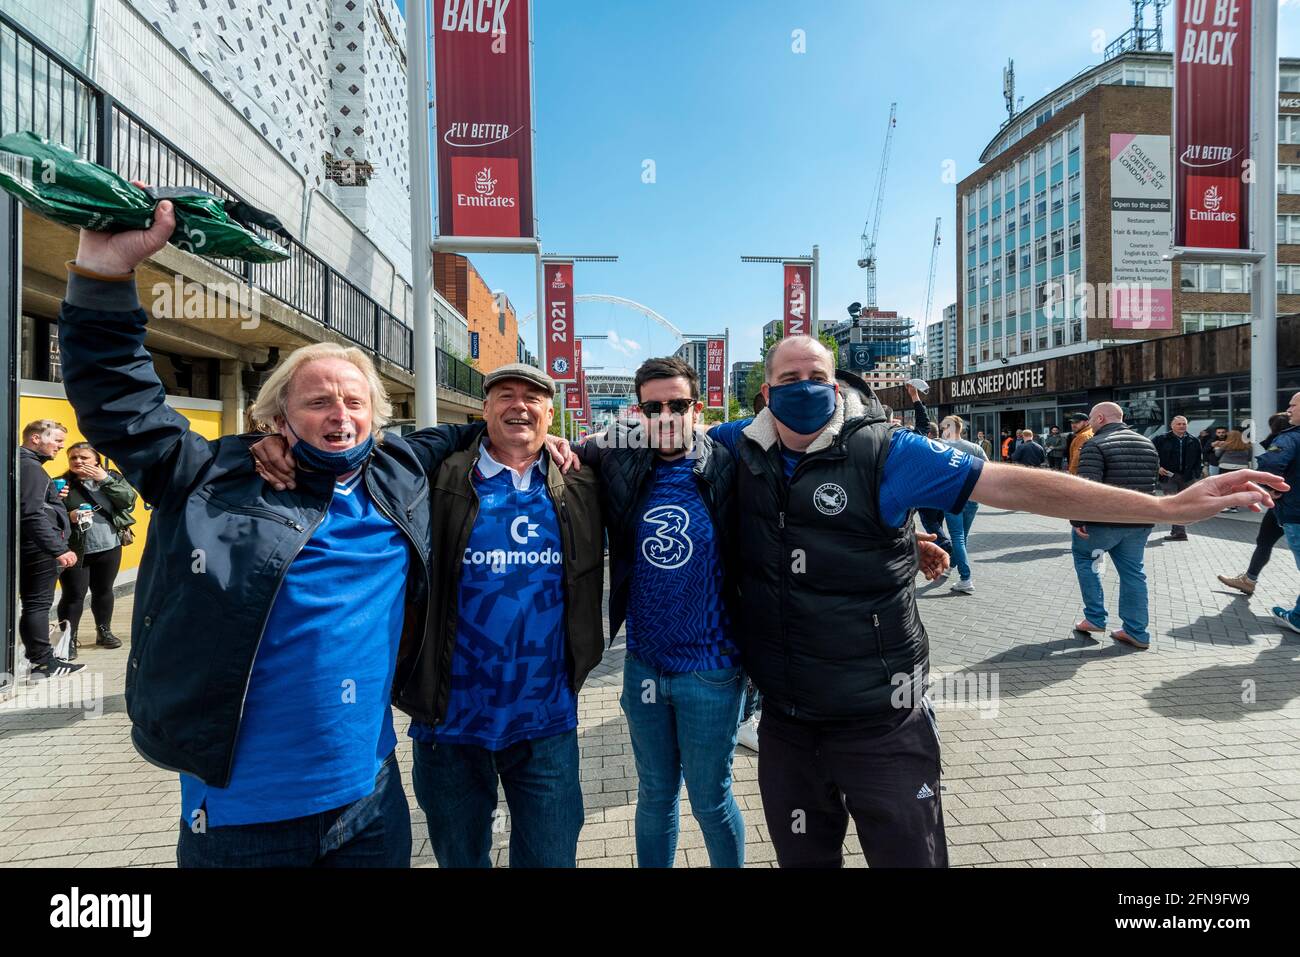 London, UK.  15 May 2021.  Chelsea fans arrive outside Wembley Stadium ahead of the FA Cup Final between Chelsea and Leicester City.  21,000 fans will attend the match, the most for over a year due to the ongoing coronavirus pandemic and this match will be another data collection exercise for the UK government as it moves to relax lockdown restrictions for major live events.  Credit: Stephen Chung / Alamy Live News Stock Photo